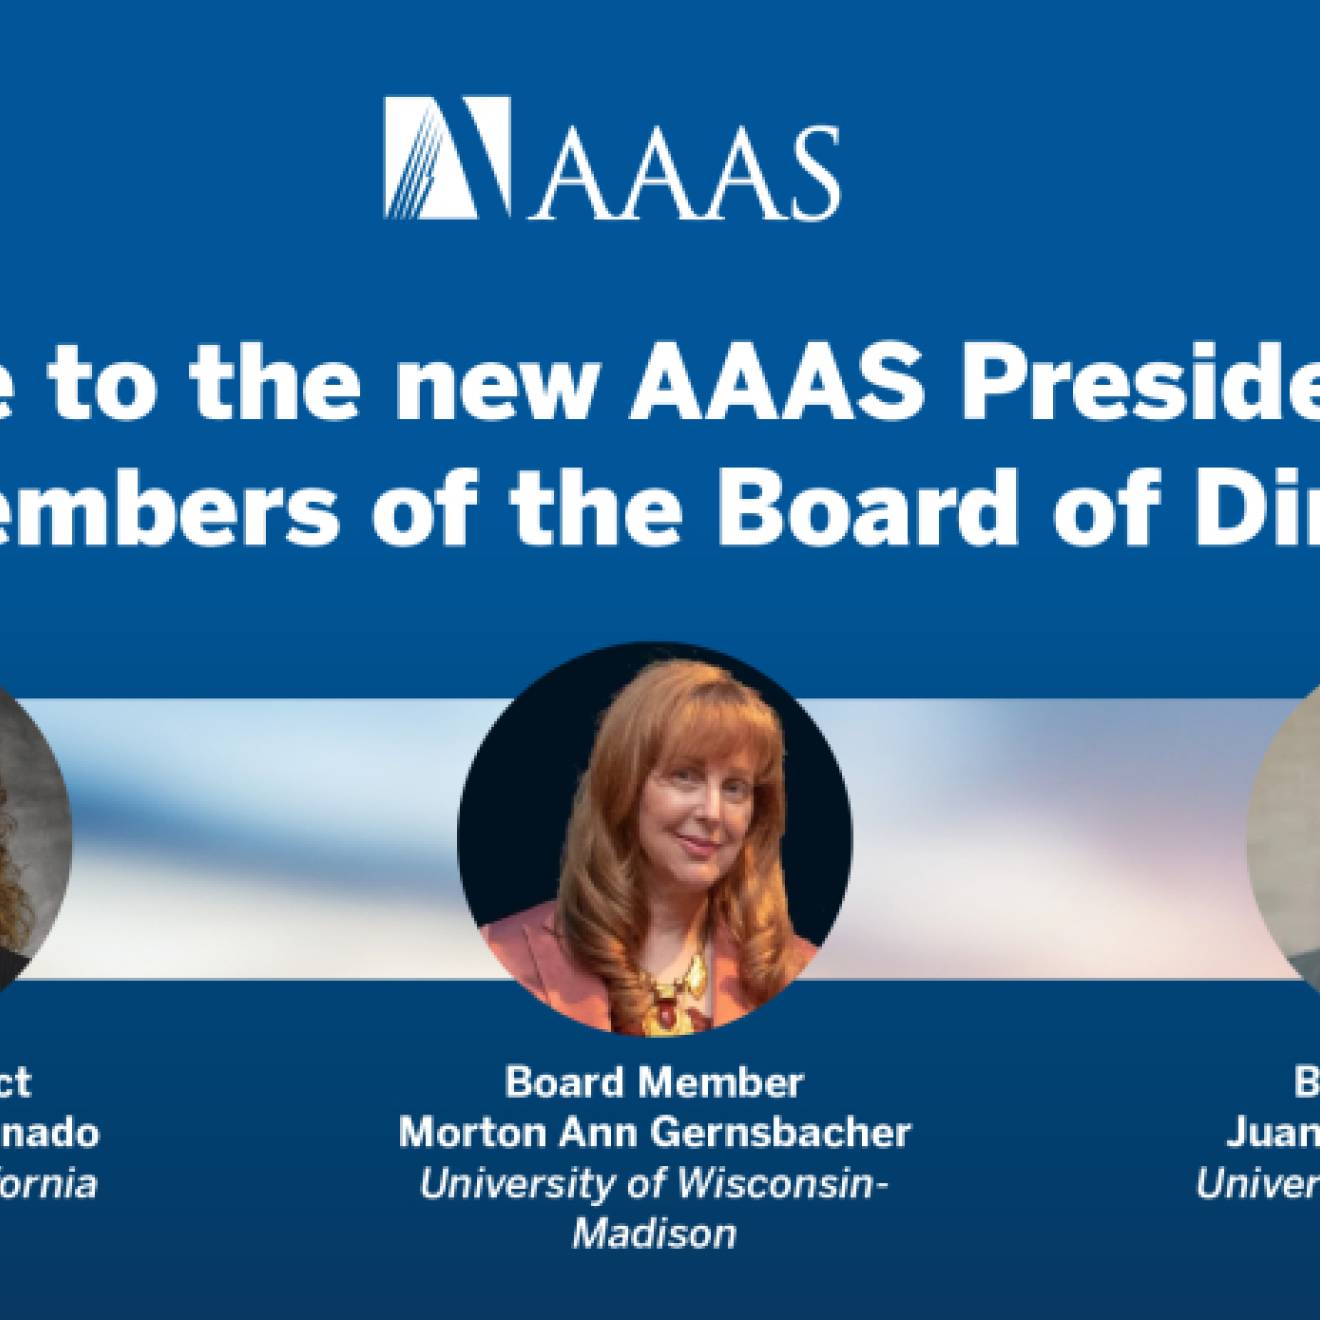 Banner from the American Association for the Advancement of Science showing three headshots of the following three people: Theresa Maldonado (Latina woman with curly hair) as Newest AAAS President-Elect, Neuroscientist Morton Ann Gernsbacher (white woman with red hair) and Biologist Juan S. Ramírez Lugo Re-Elected to AAAS Board of Directors (Latino man with goatee)